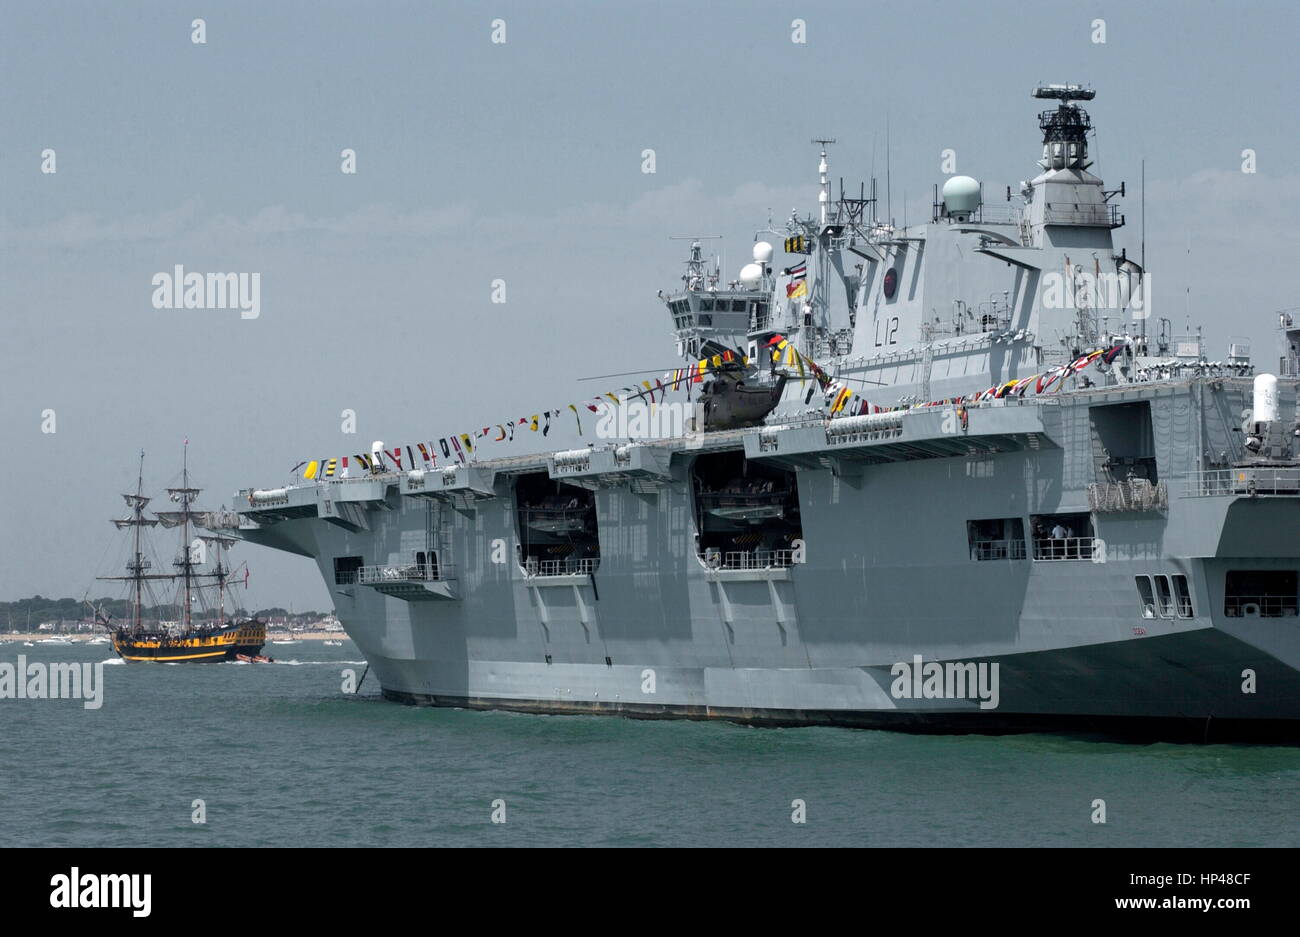 AJAXNETPHOTO. 27TH JUNE, 2005.PORTSMOUTH,ENGLAND. - T200 INTERNATIONAL FLEET REVIEW HMS OCEAN, ASSAULT SHIP,18,500 TONS, WITH THE SQUARE RIGGER TURK. PHOTO:JONATHAN EASTLAND/AJAX REF:D152706 154 Stock Photo